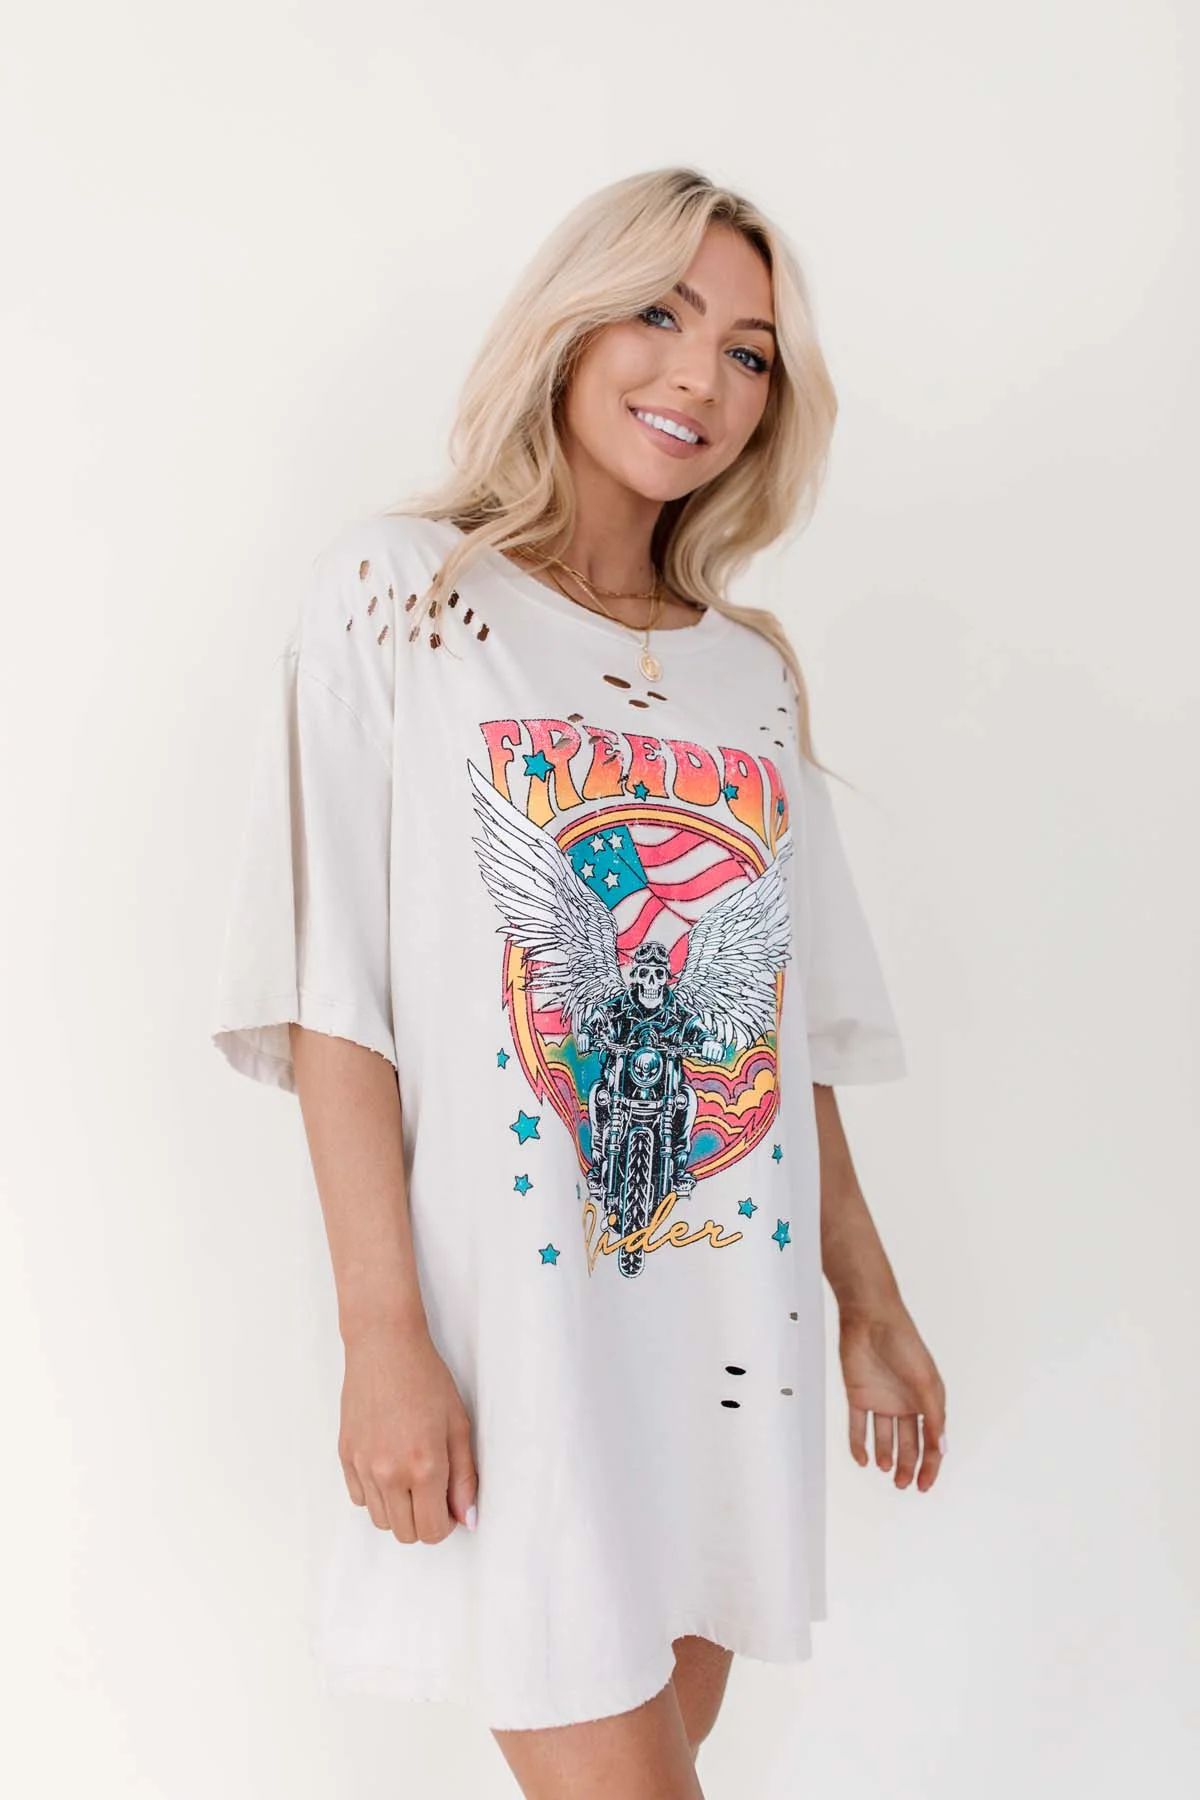 Marvyn Distressed Graphic Tee- FINAL SALE | The Post